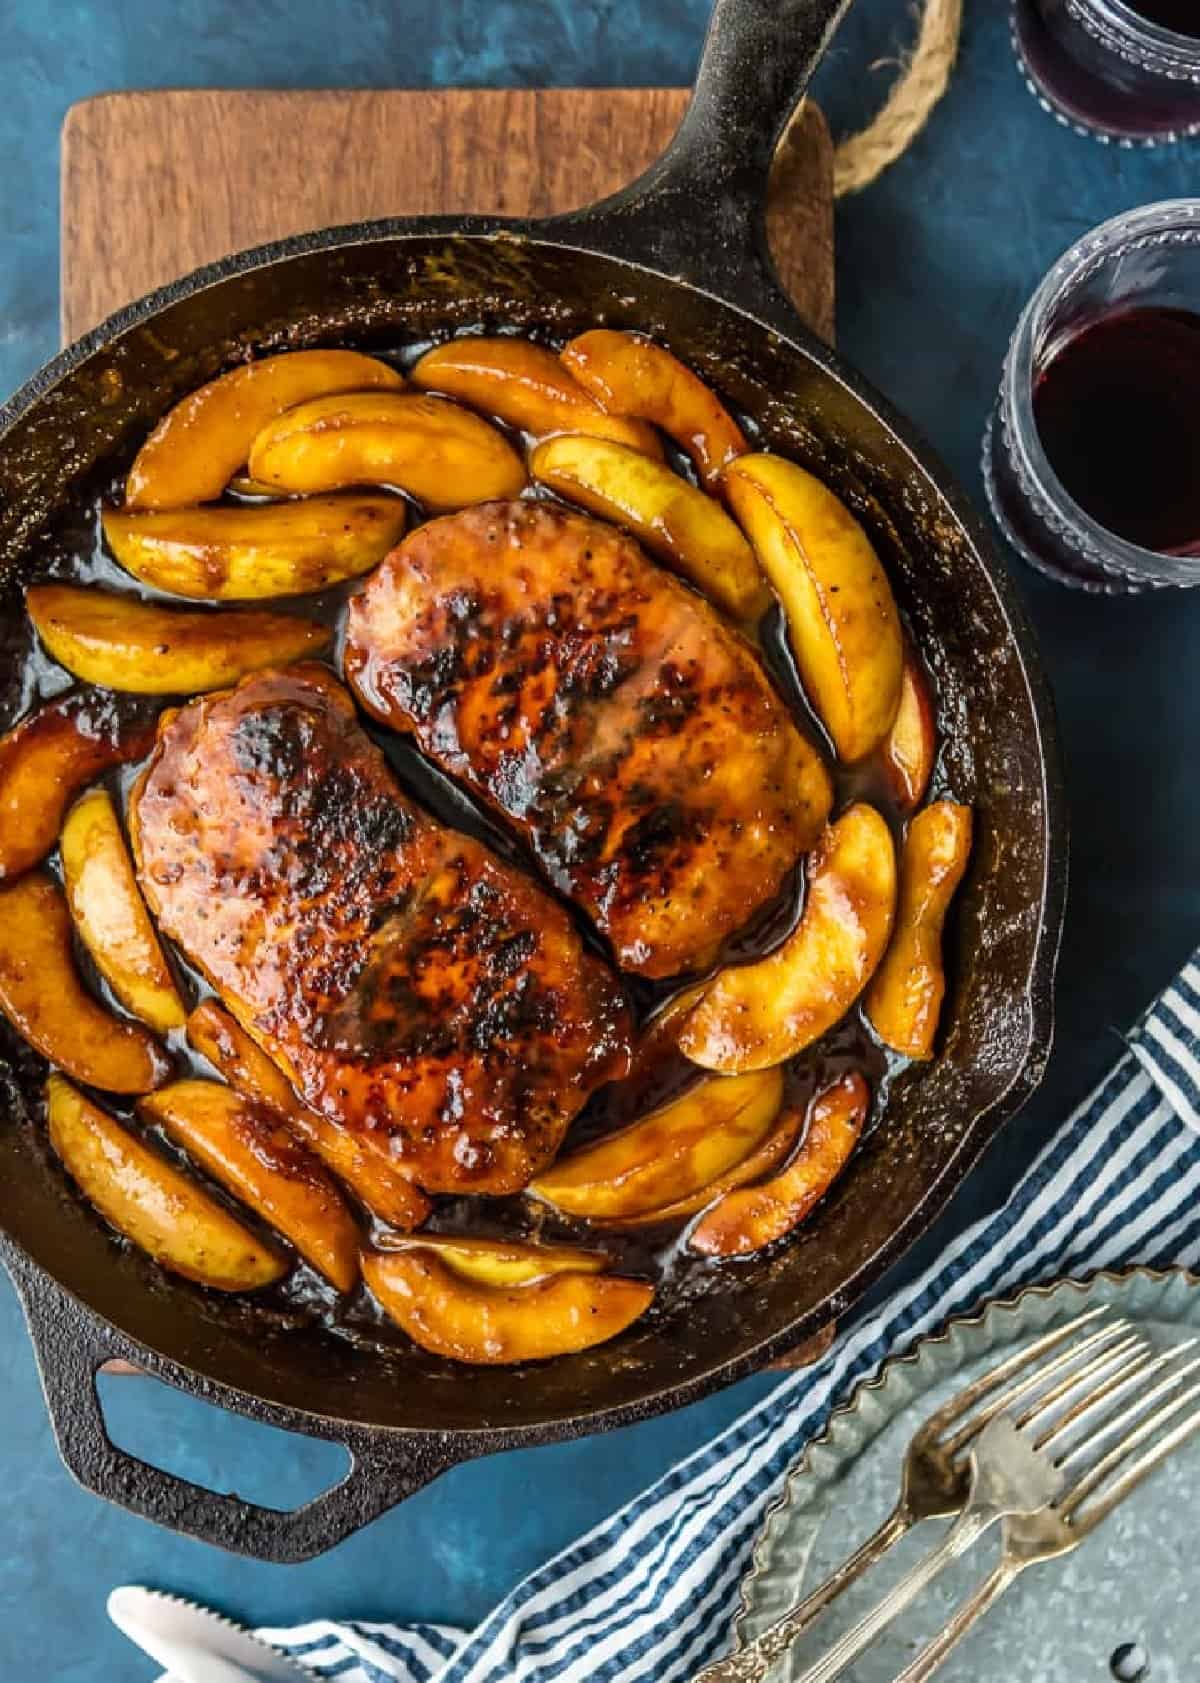 A cast iron skillet filled with pork chops and apples, accompanied by a glass of wine.